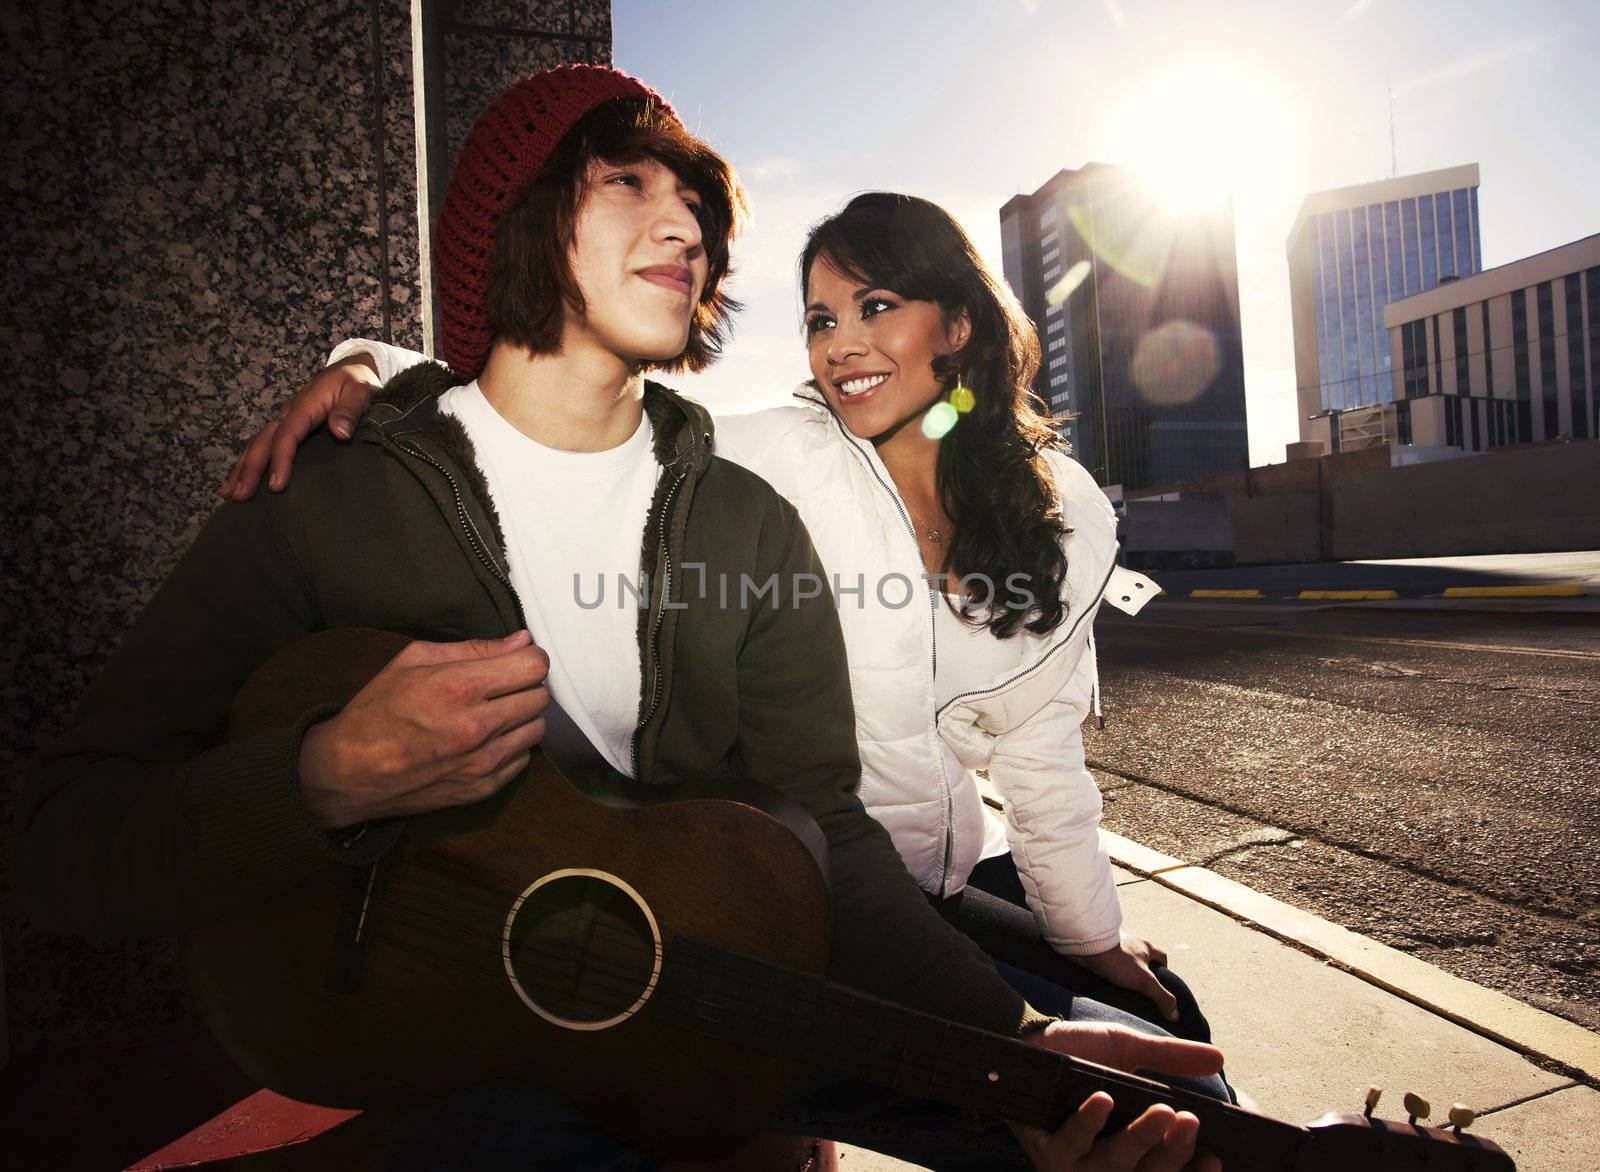 Musician and Pretty Girlfriend Downtown by Creatista